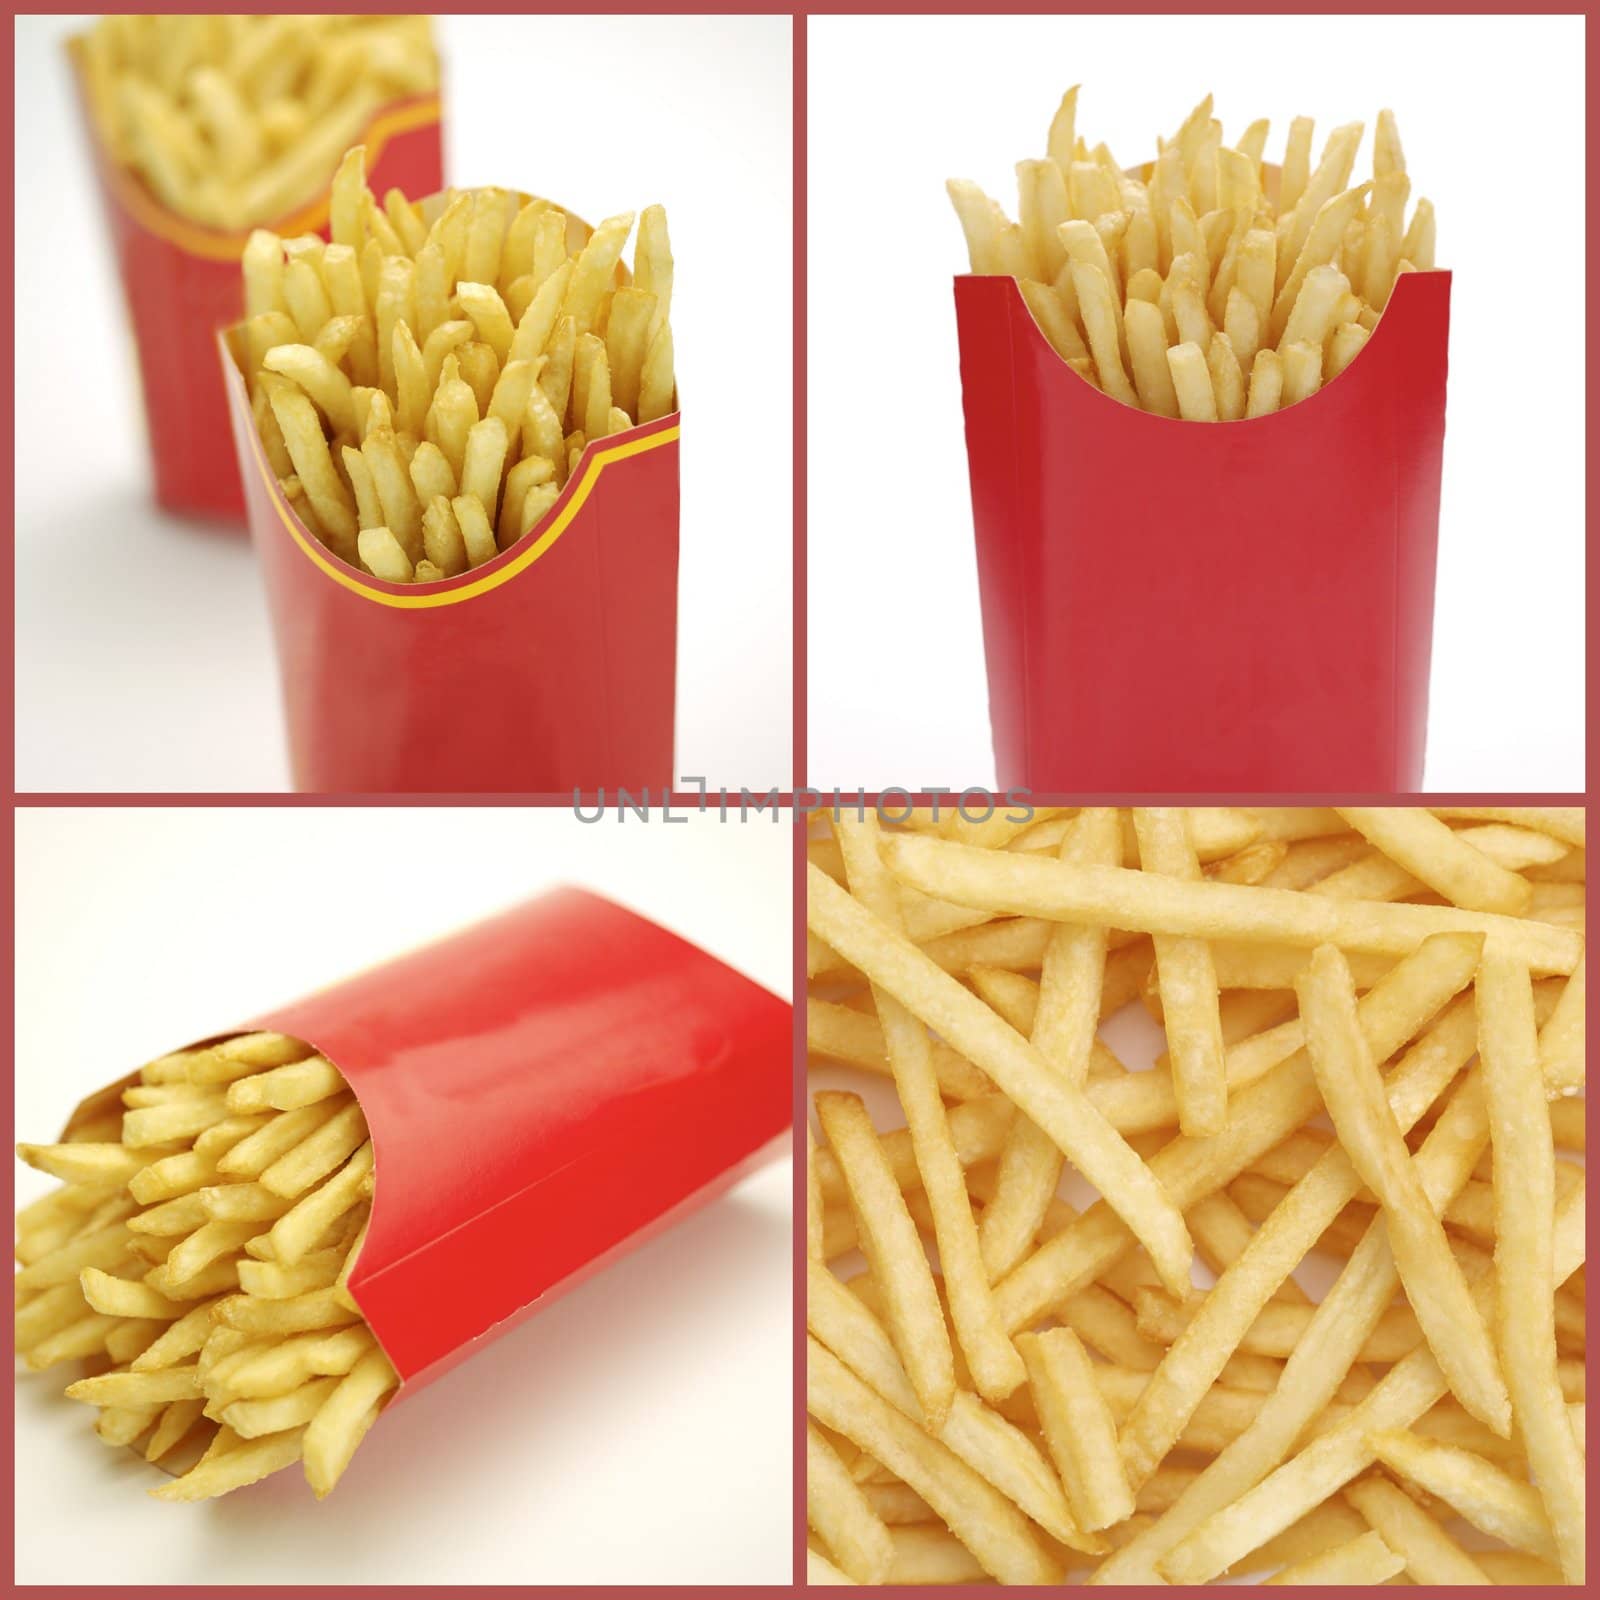 French fries collage by Baltus